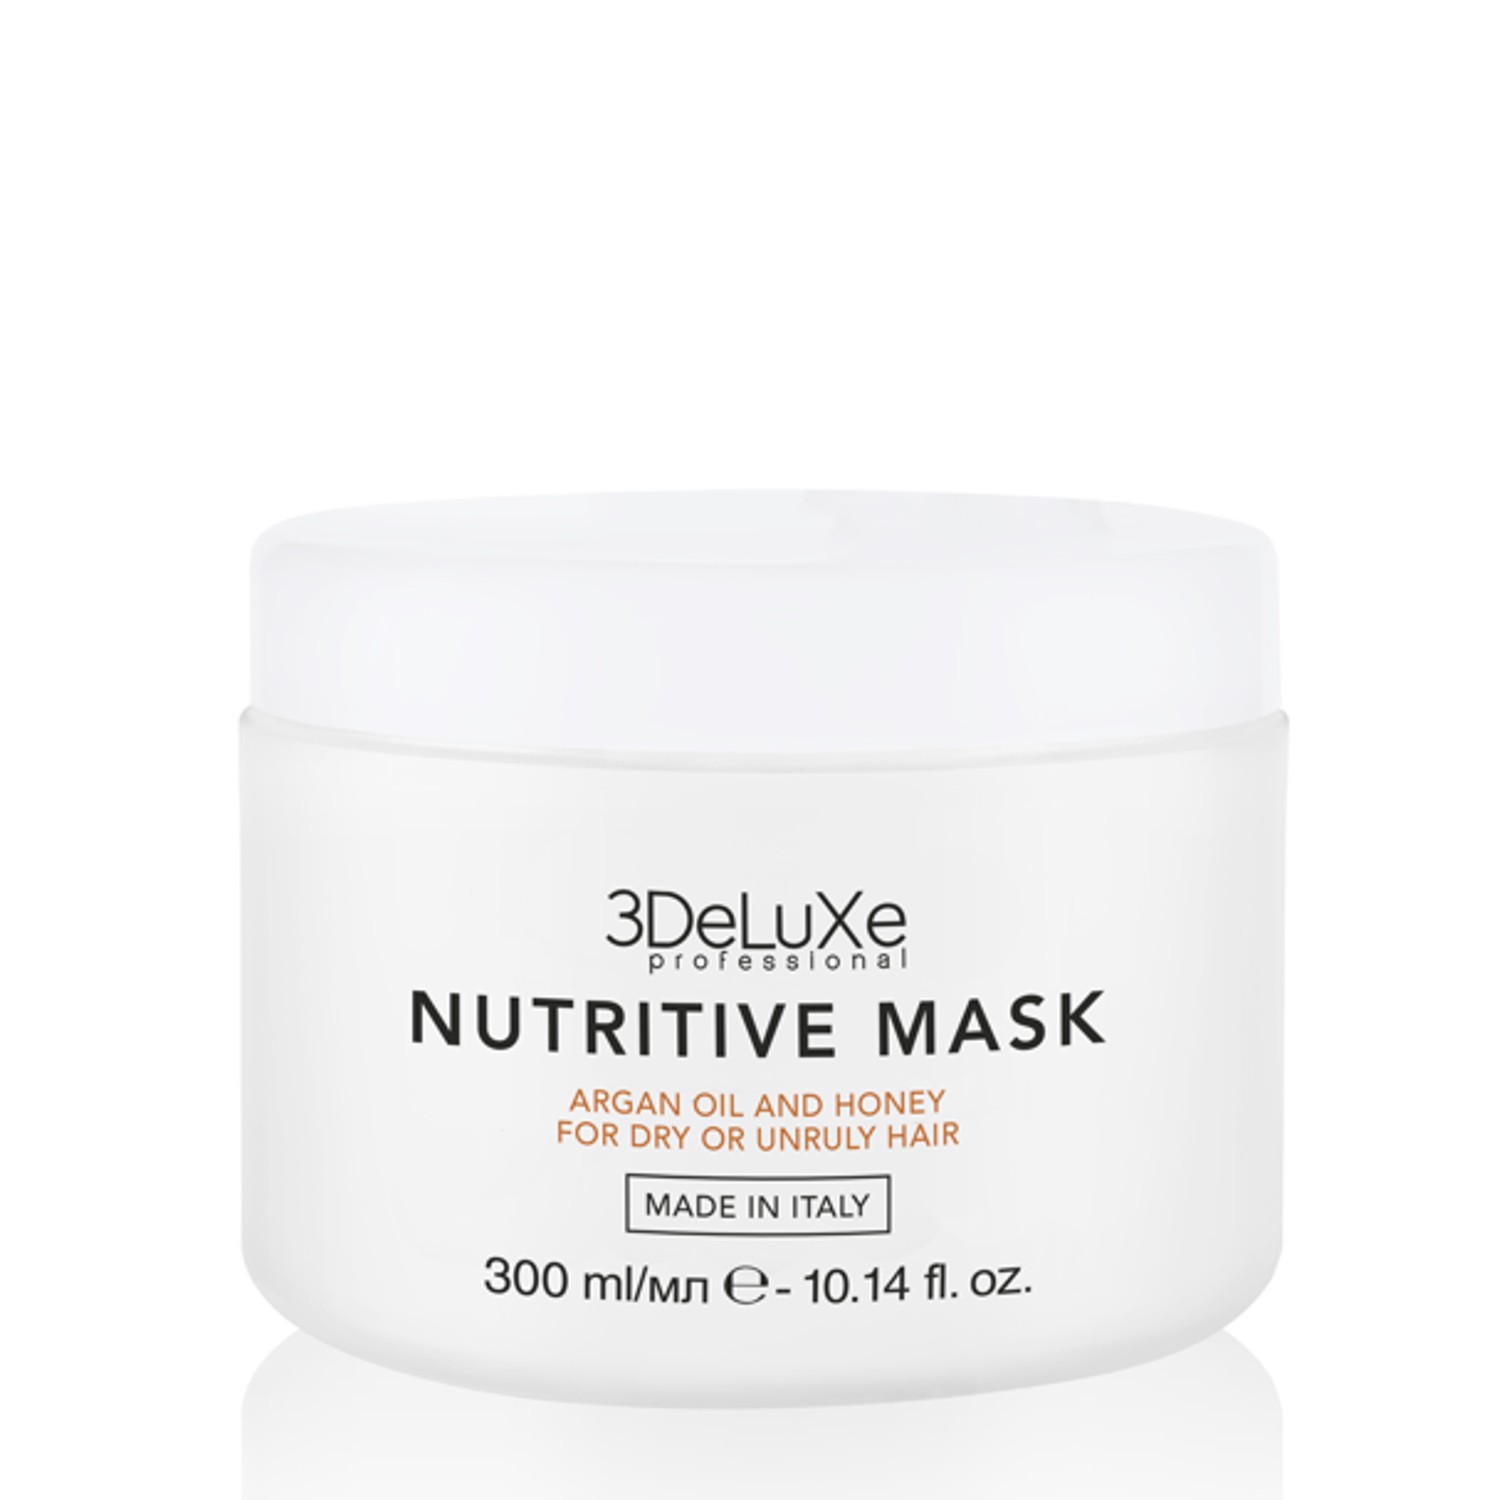 3DeLuXe Professional NUTRITIVE Mask 300 ml